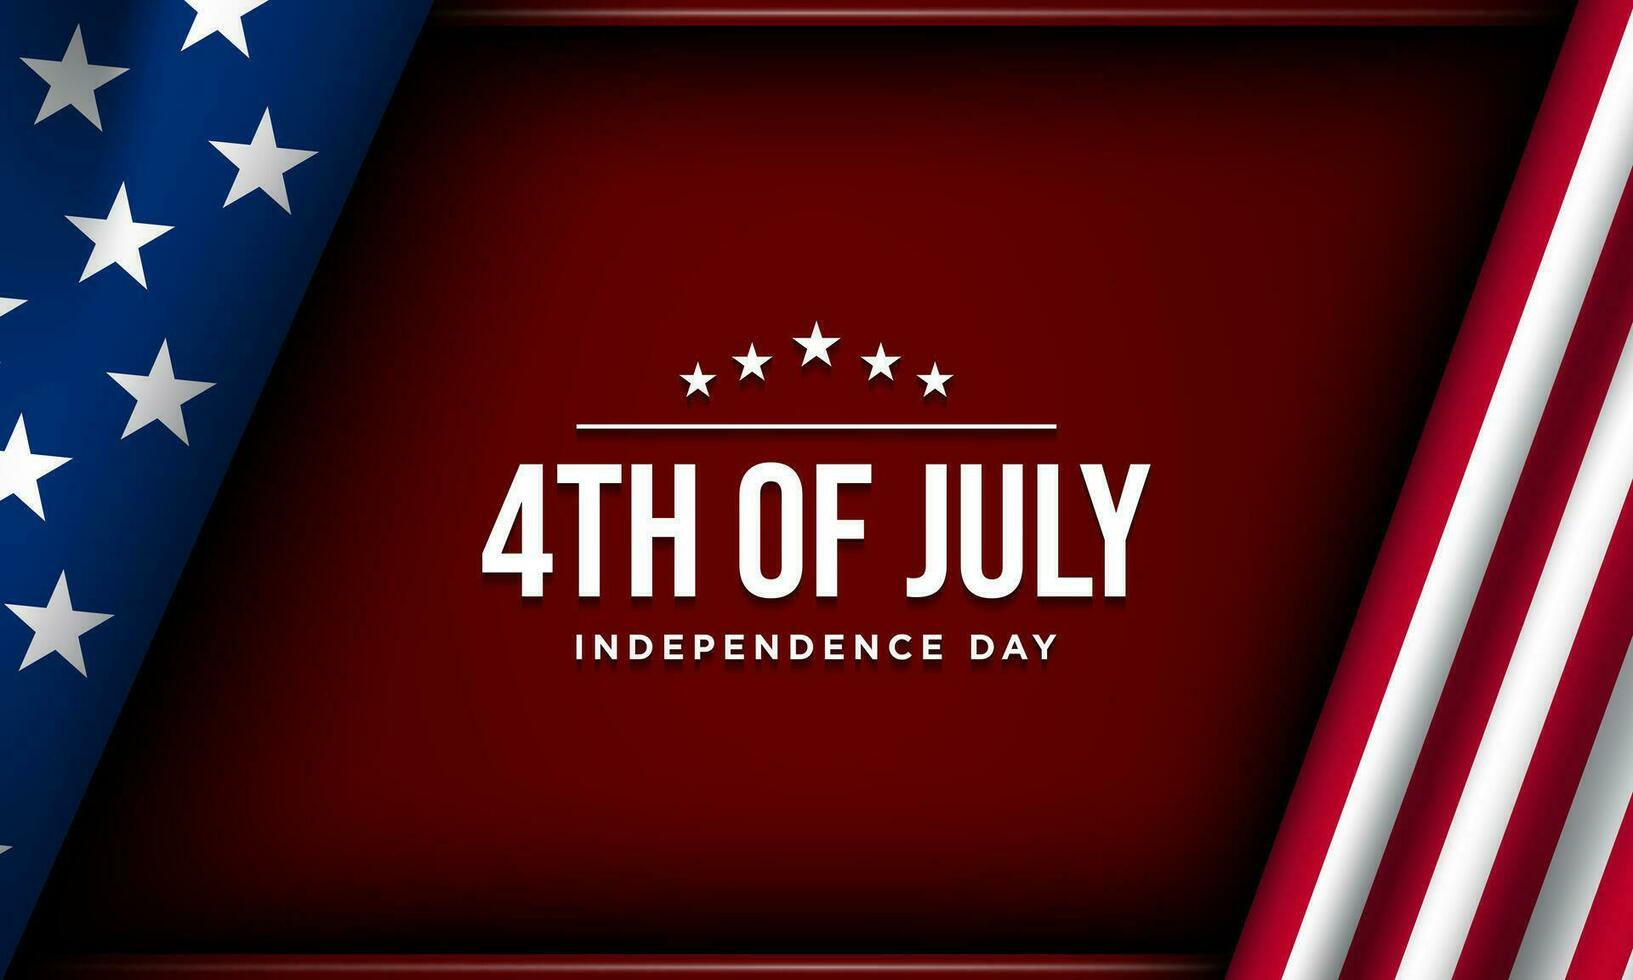 Happy 4th of July USA Independence Day Background Design. vector